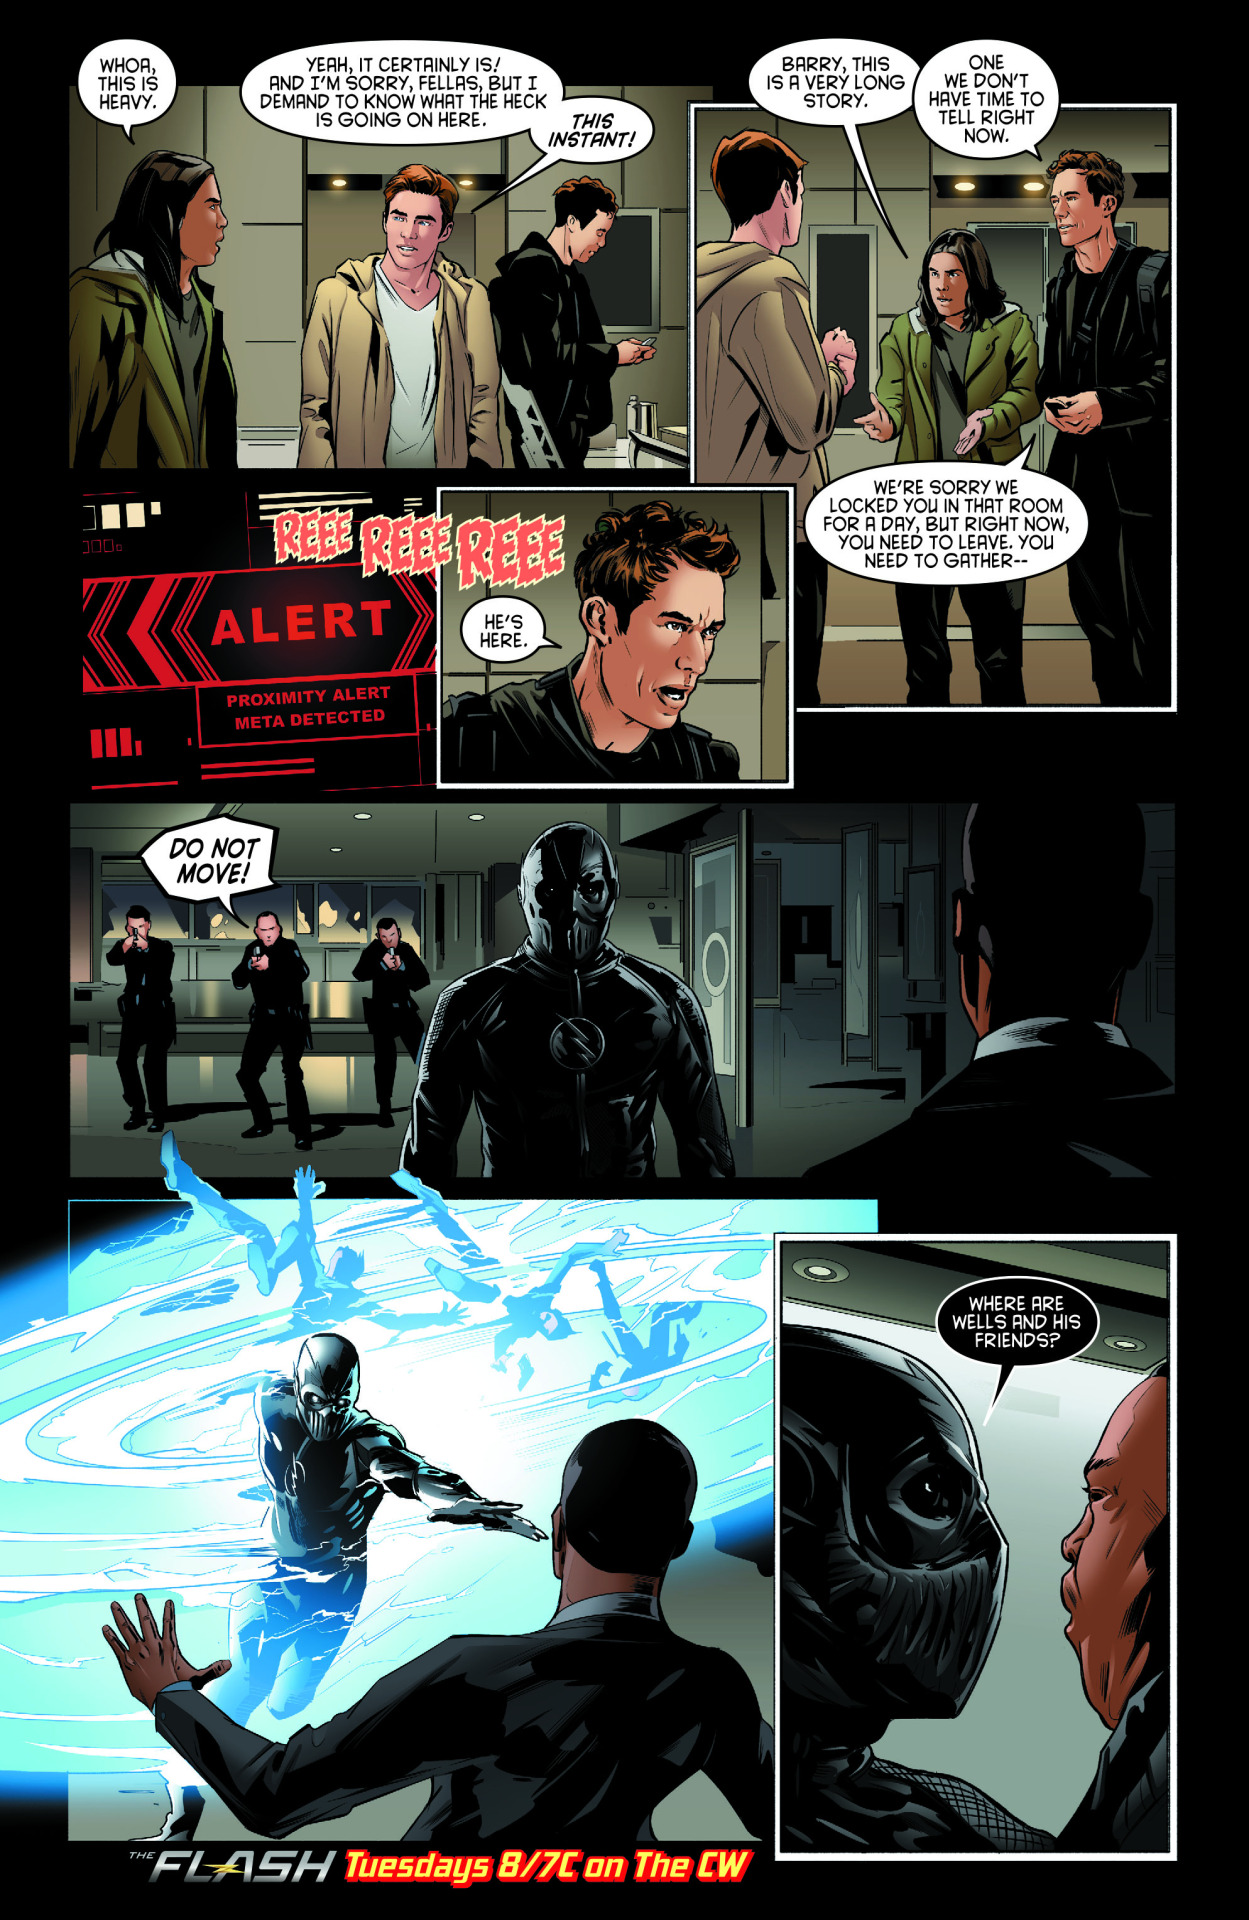 The Flash - Episode 2.14 - Escape from Earth-2 - Comic Preview